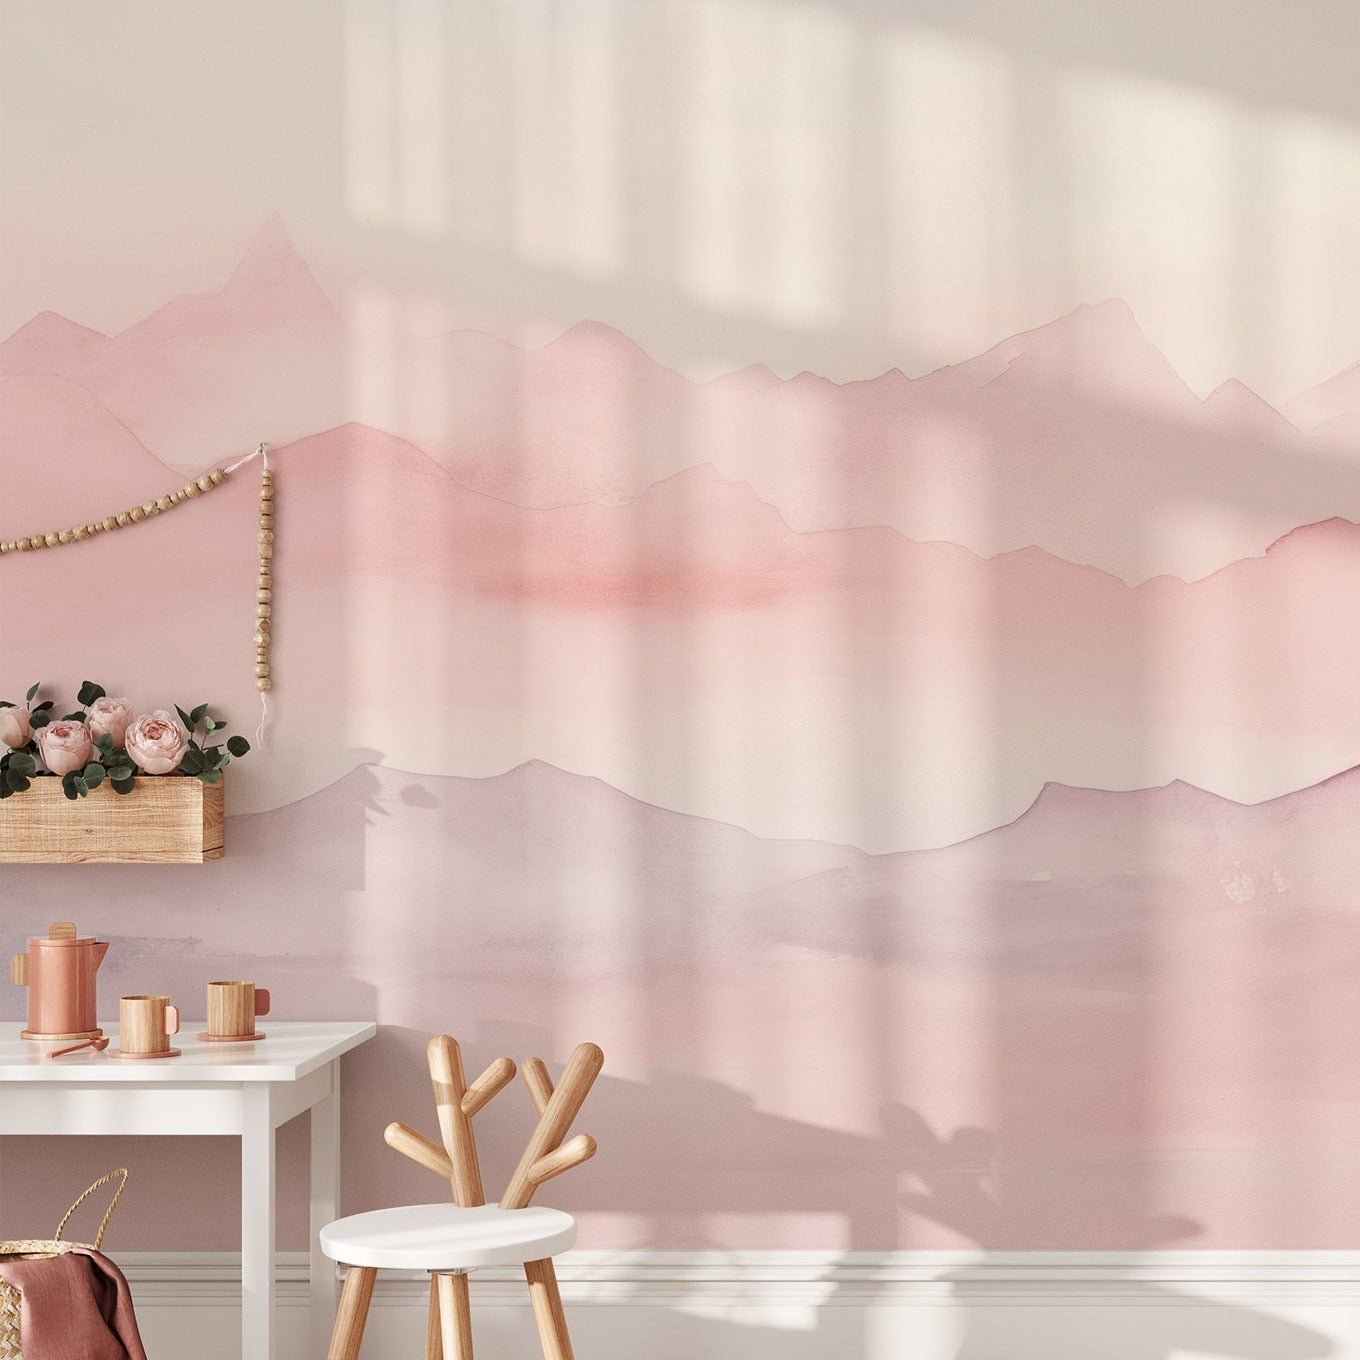 Pastel Mountain Mural installed in a children’s room with toy storage and minimalist decor."